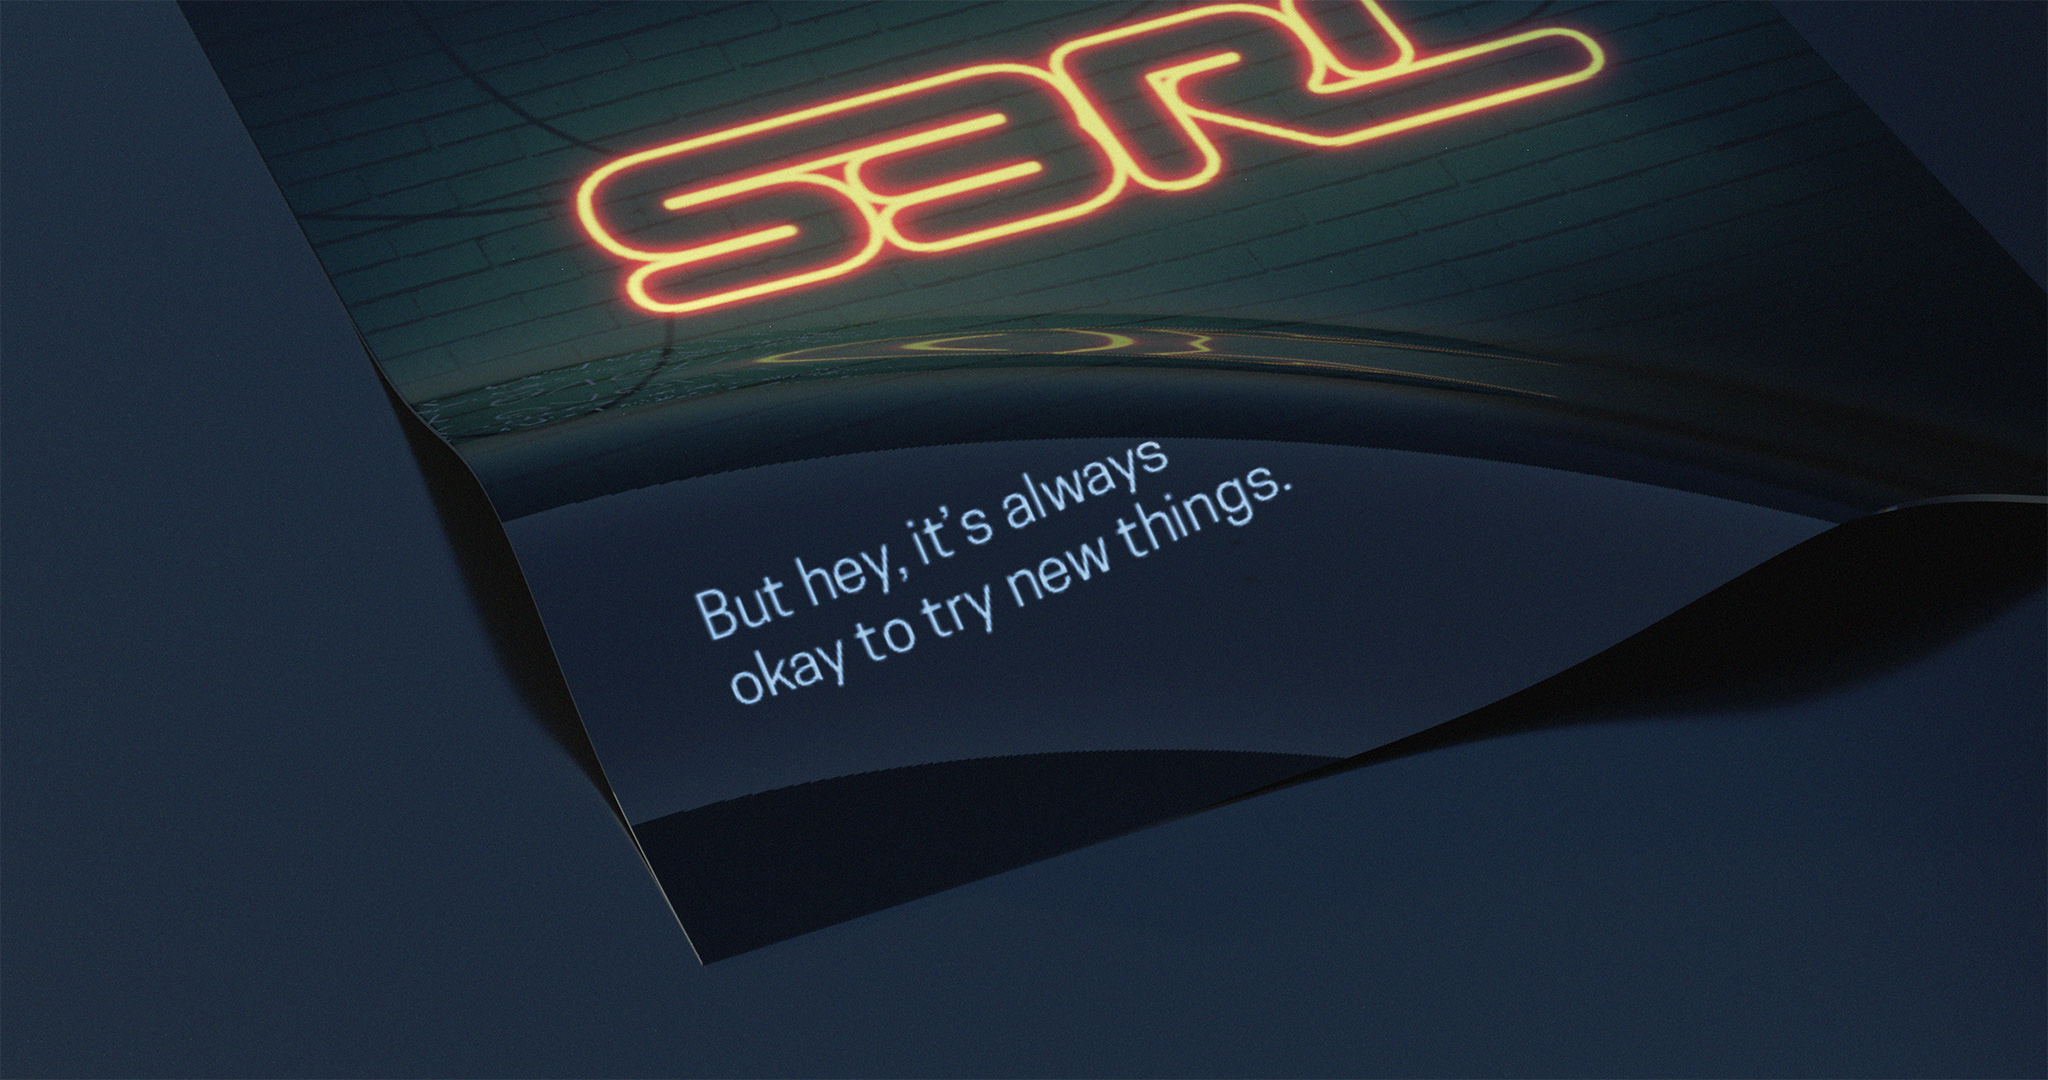 3D render of a warped, dark, metallic page placed against a dark, metallic background surface. The page reads: But hey, it’s always okay to try new things. It also features neon signage typography, reading: S3RL.